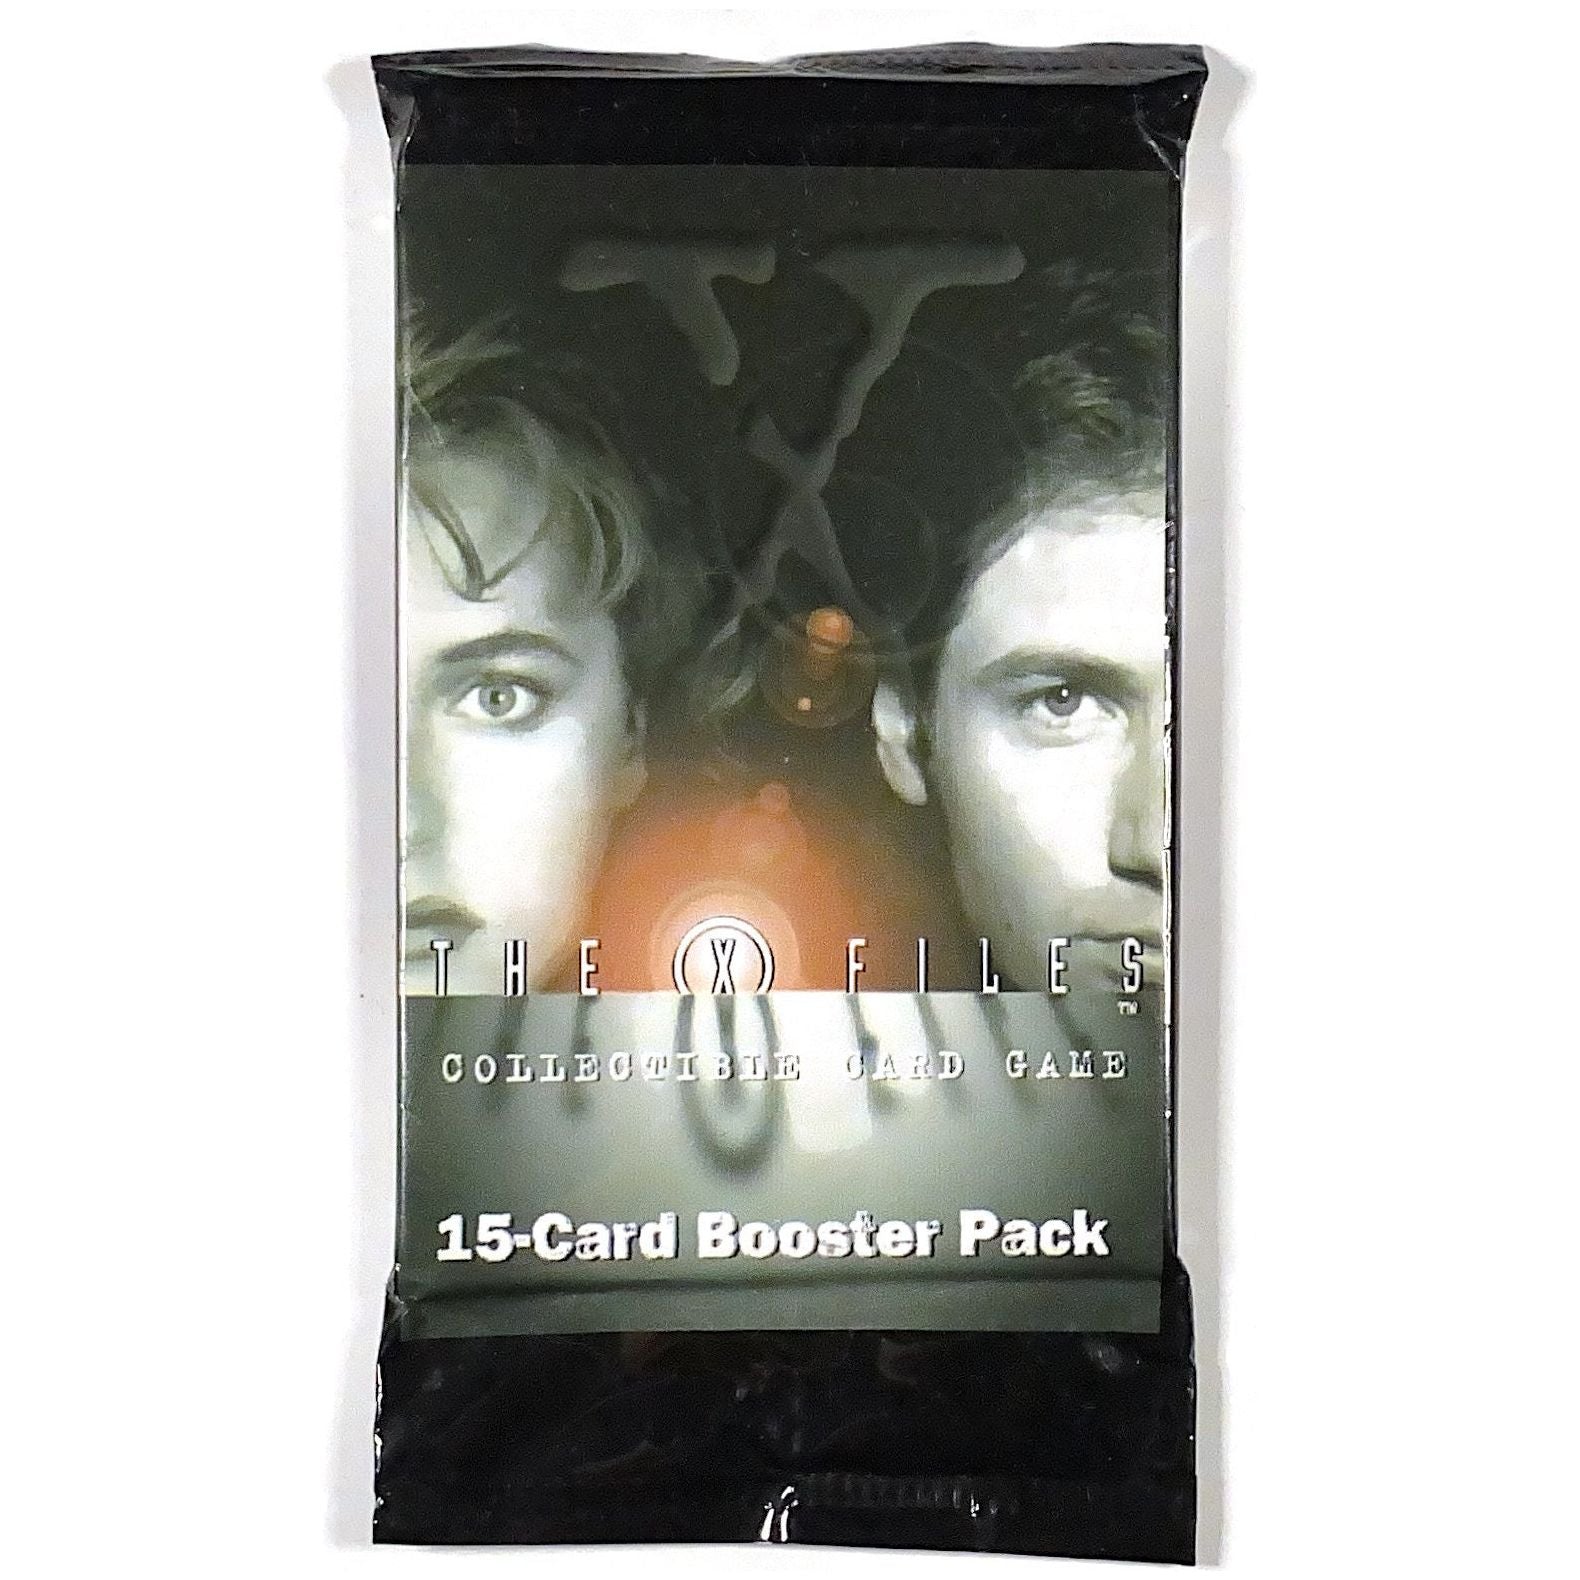  1996 Twentieth Century Fox X-Files CCG Booster Pack  Local Legends Cards & Collectibles